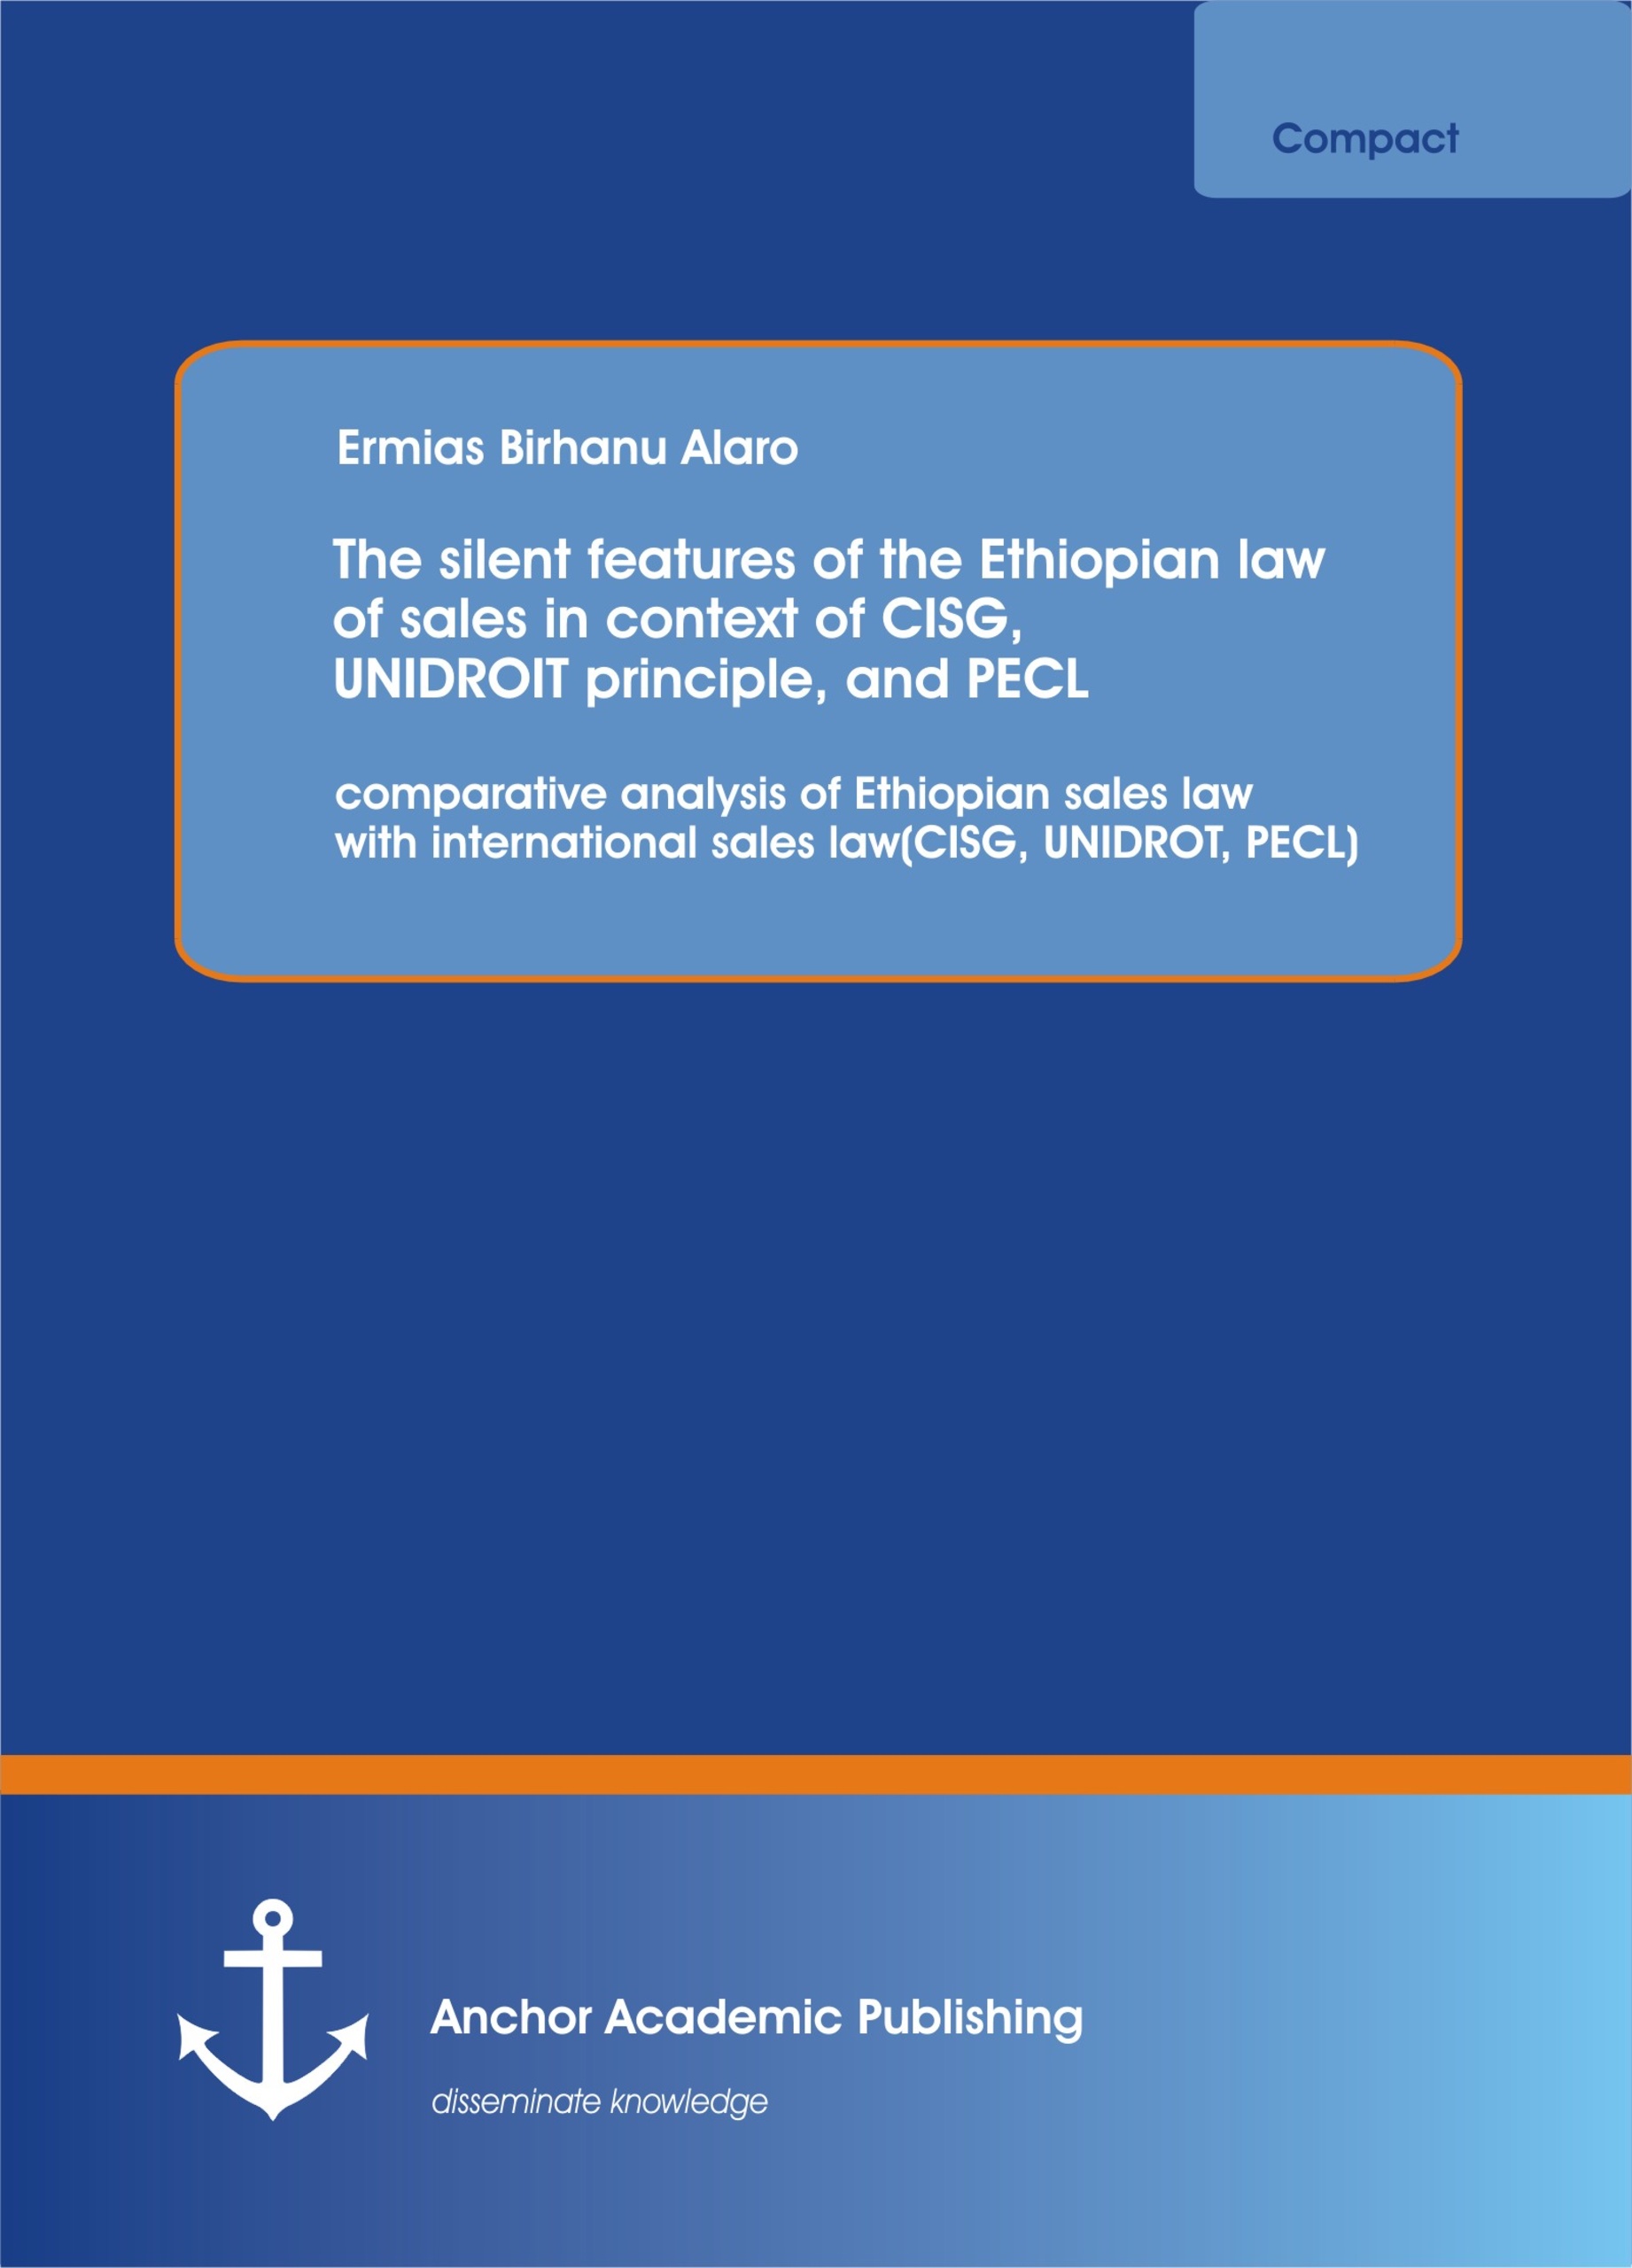 The silent features  of the Ethiopian law of sales in context of CISG, UNIDROIT principle, and PECL